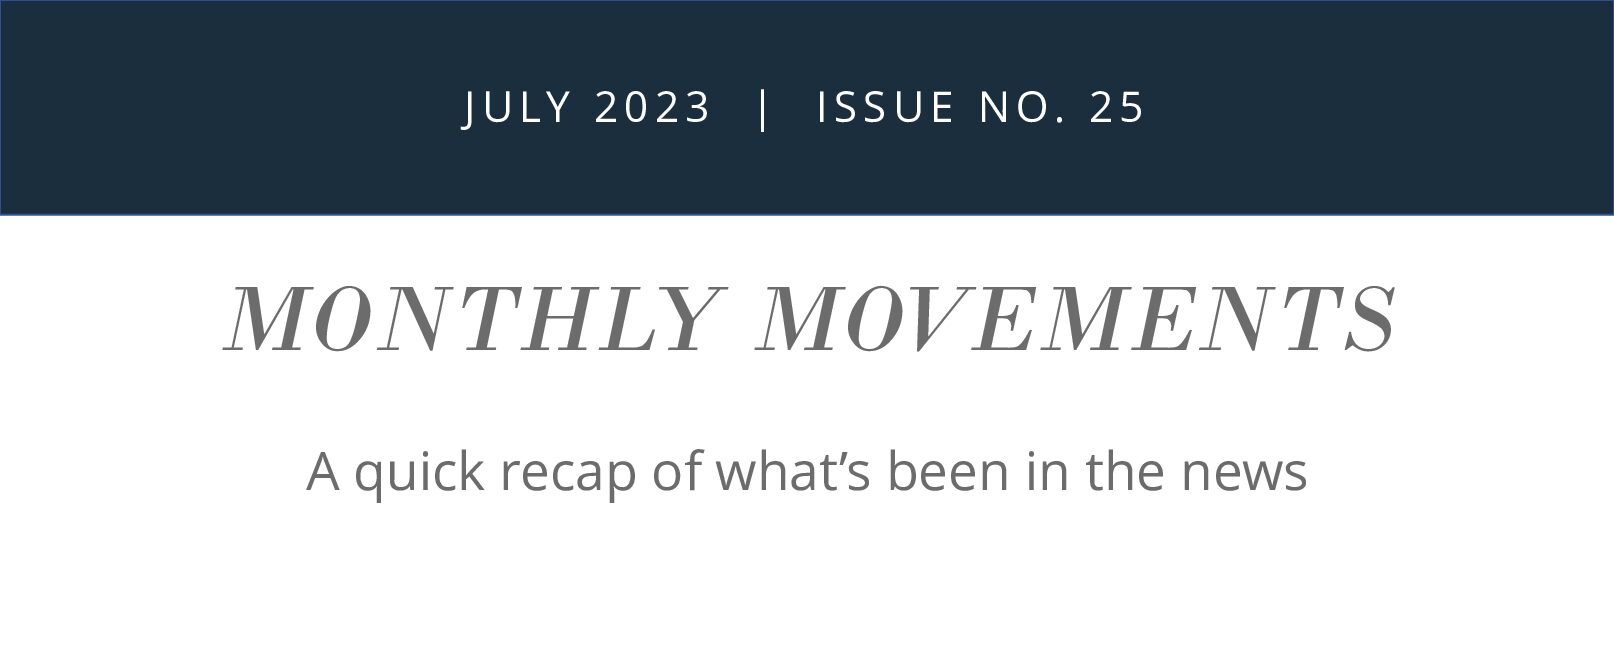 Monthly Movements JULY 202